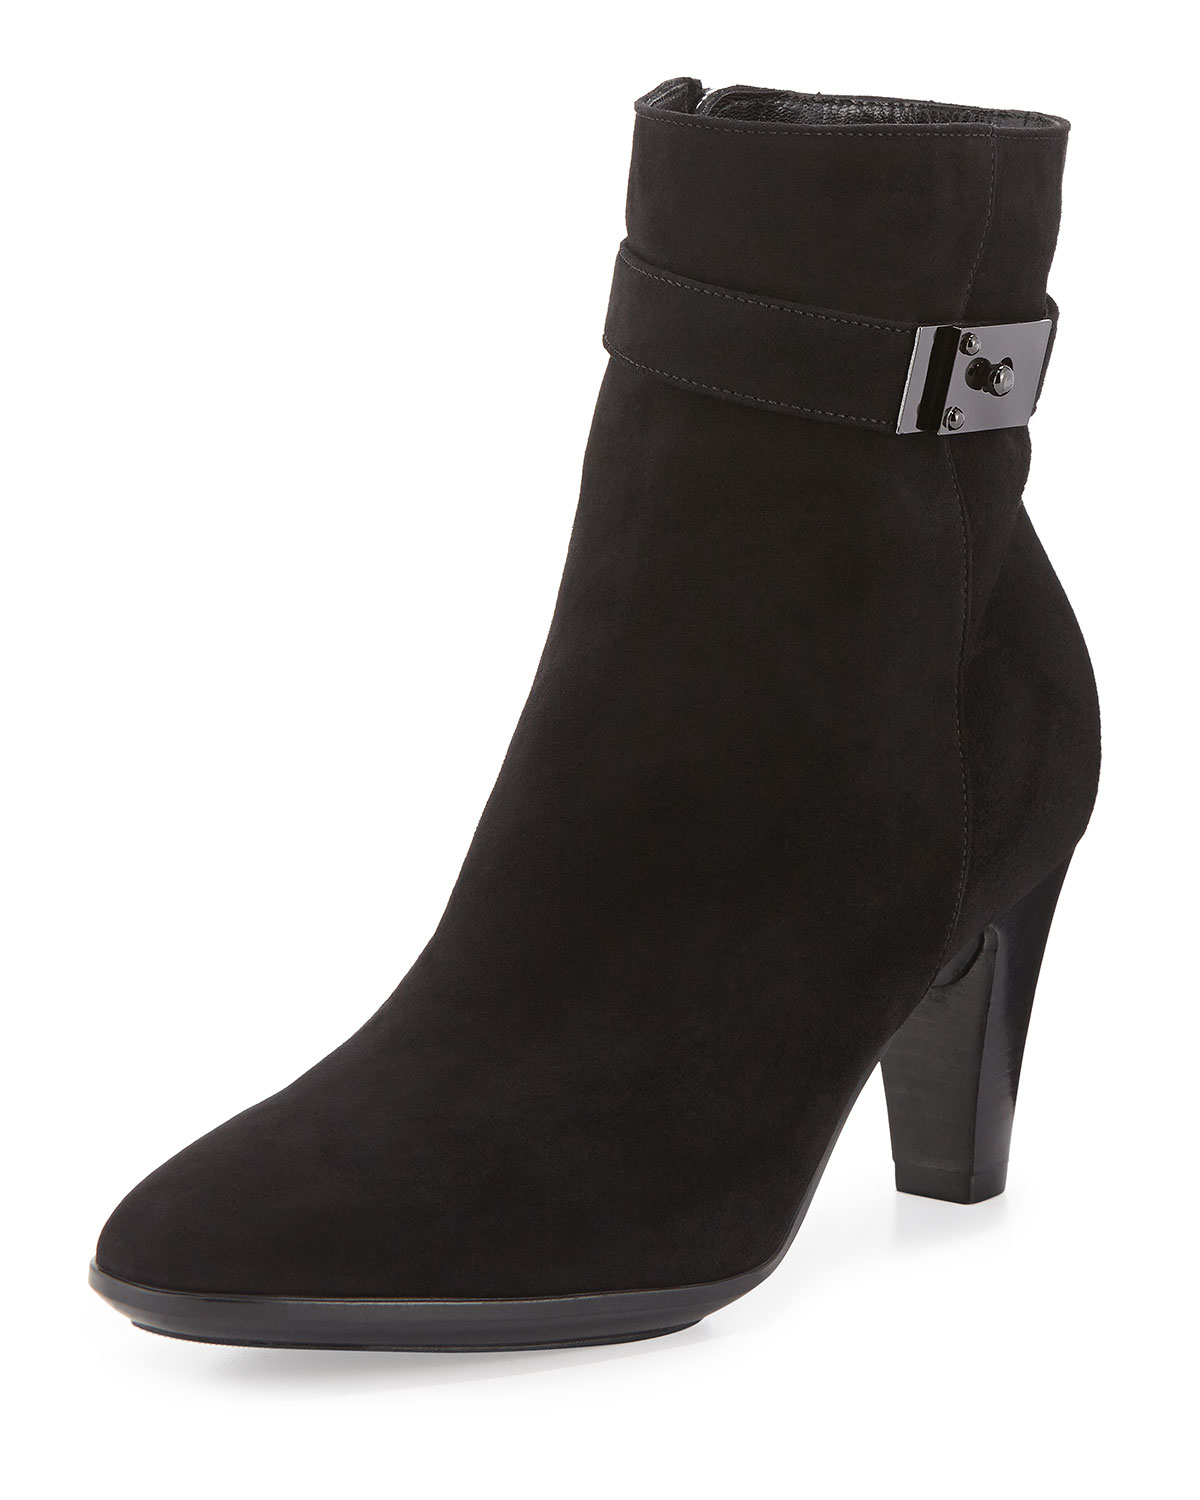 Lyst - Aquatalia Danele Buckled Suede Ankle Boot in Black